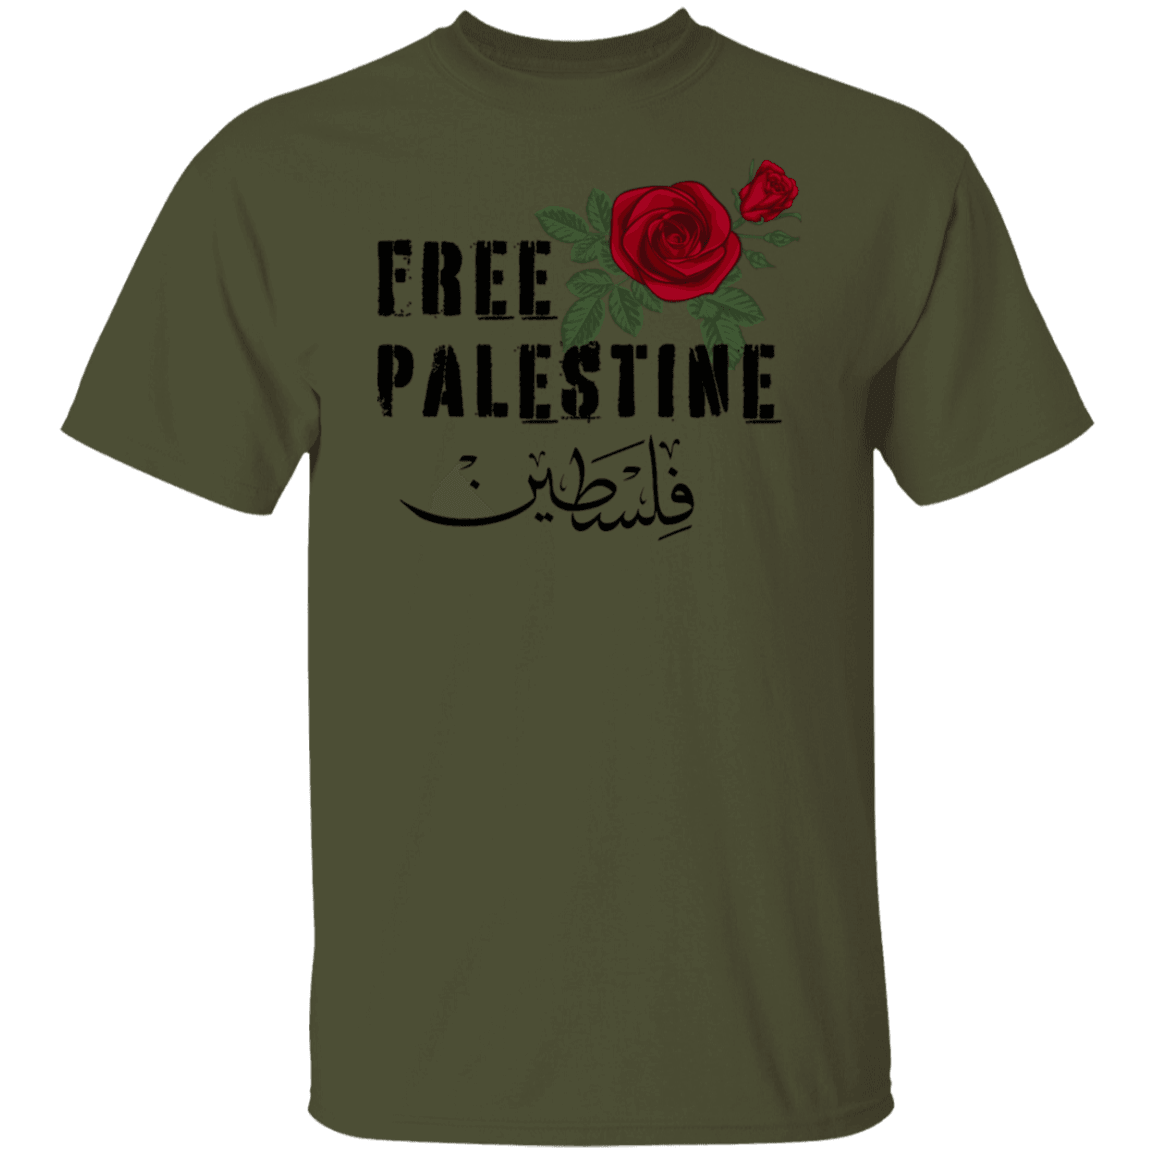 Free Palestine with Arabic and Red Rose Tshirt - SunnahBay